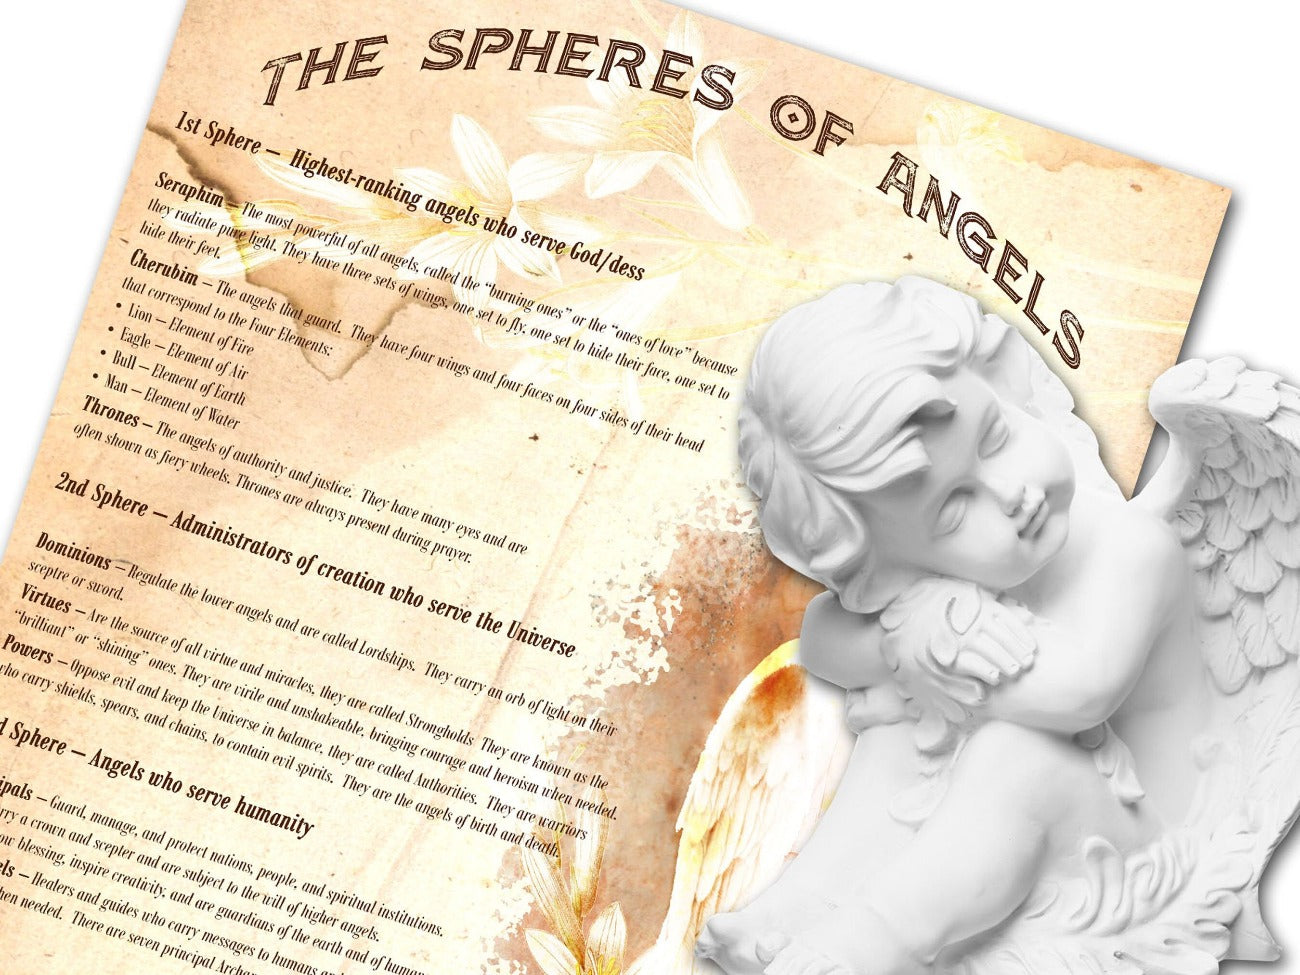 SPHERES of ANGELS Printable closeup image with text detail - Morgana Magick Spell